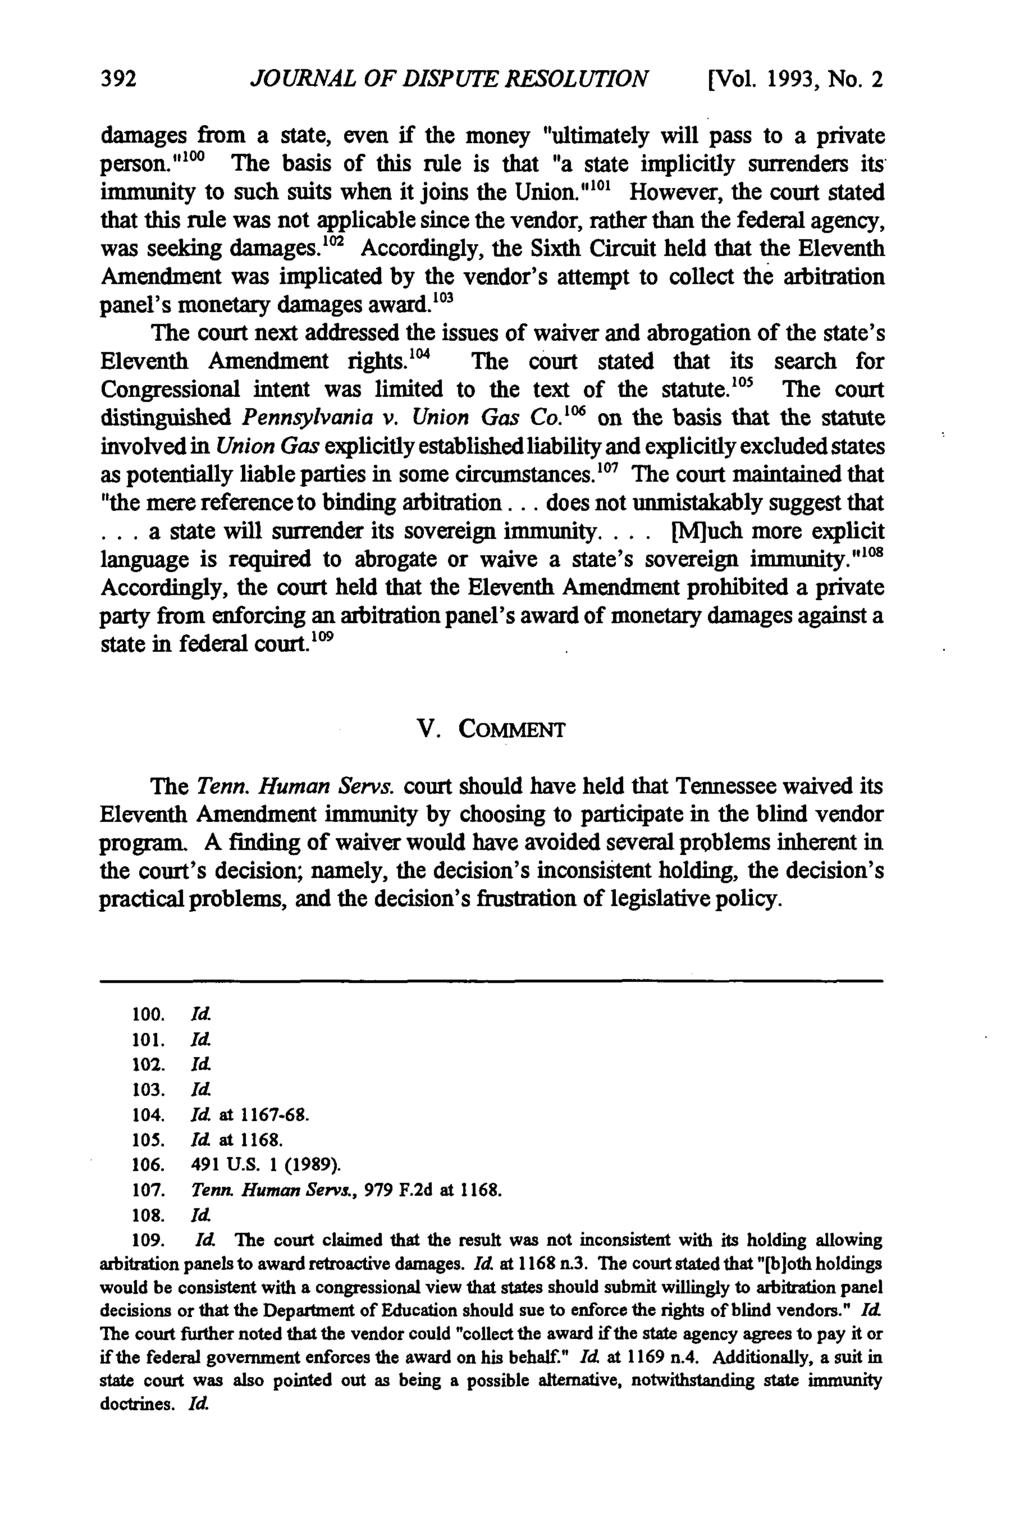 Journal of Dispute Resolution, Vol. 1993, Iss. 2 [1993], Art. 9 JOURNAL OF DISPUTE RESOLUTION [Vol. 1993, No. 2 damages from a state, even if the money "ultimately will pass to a private person.